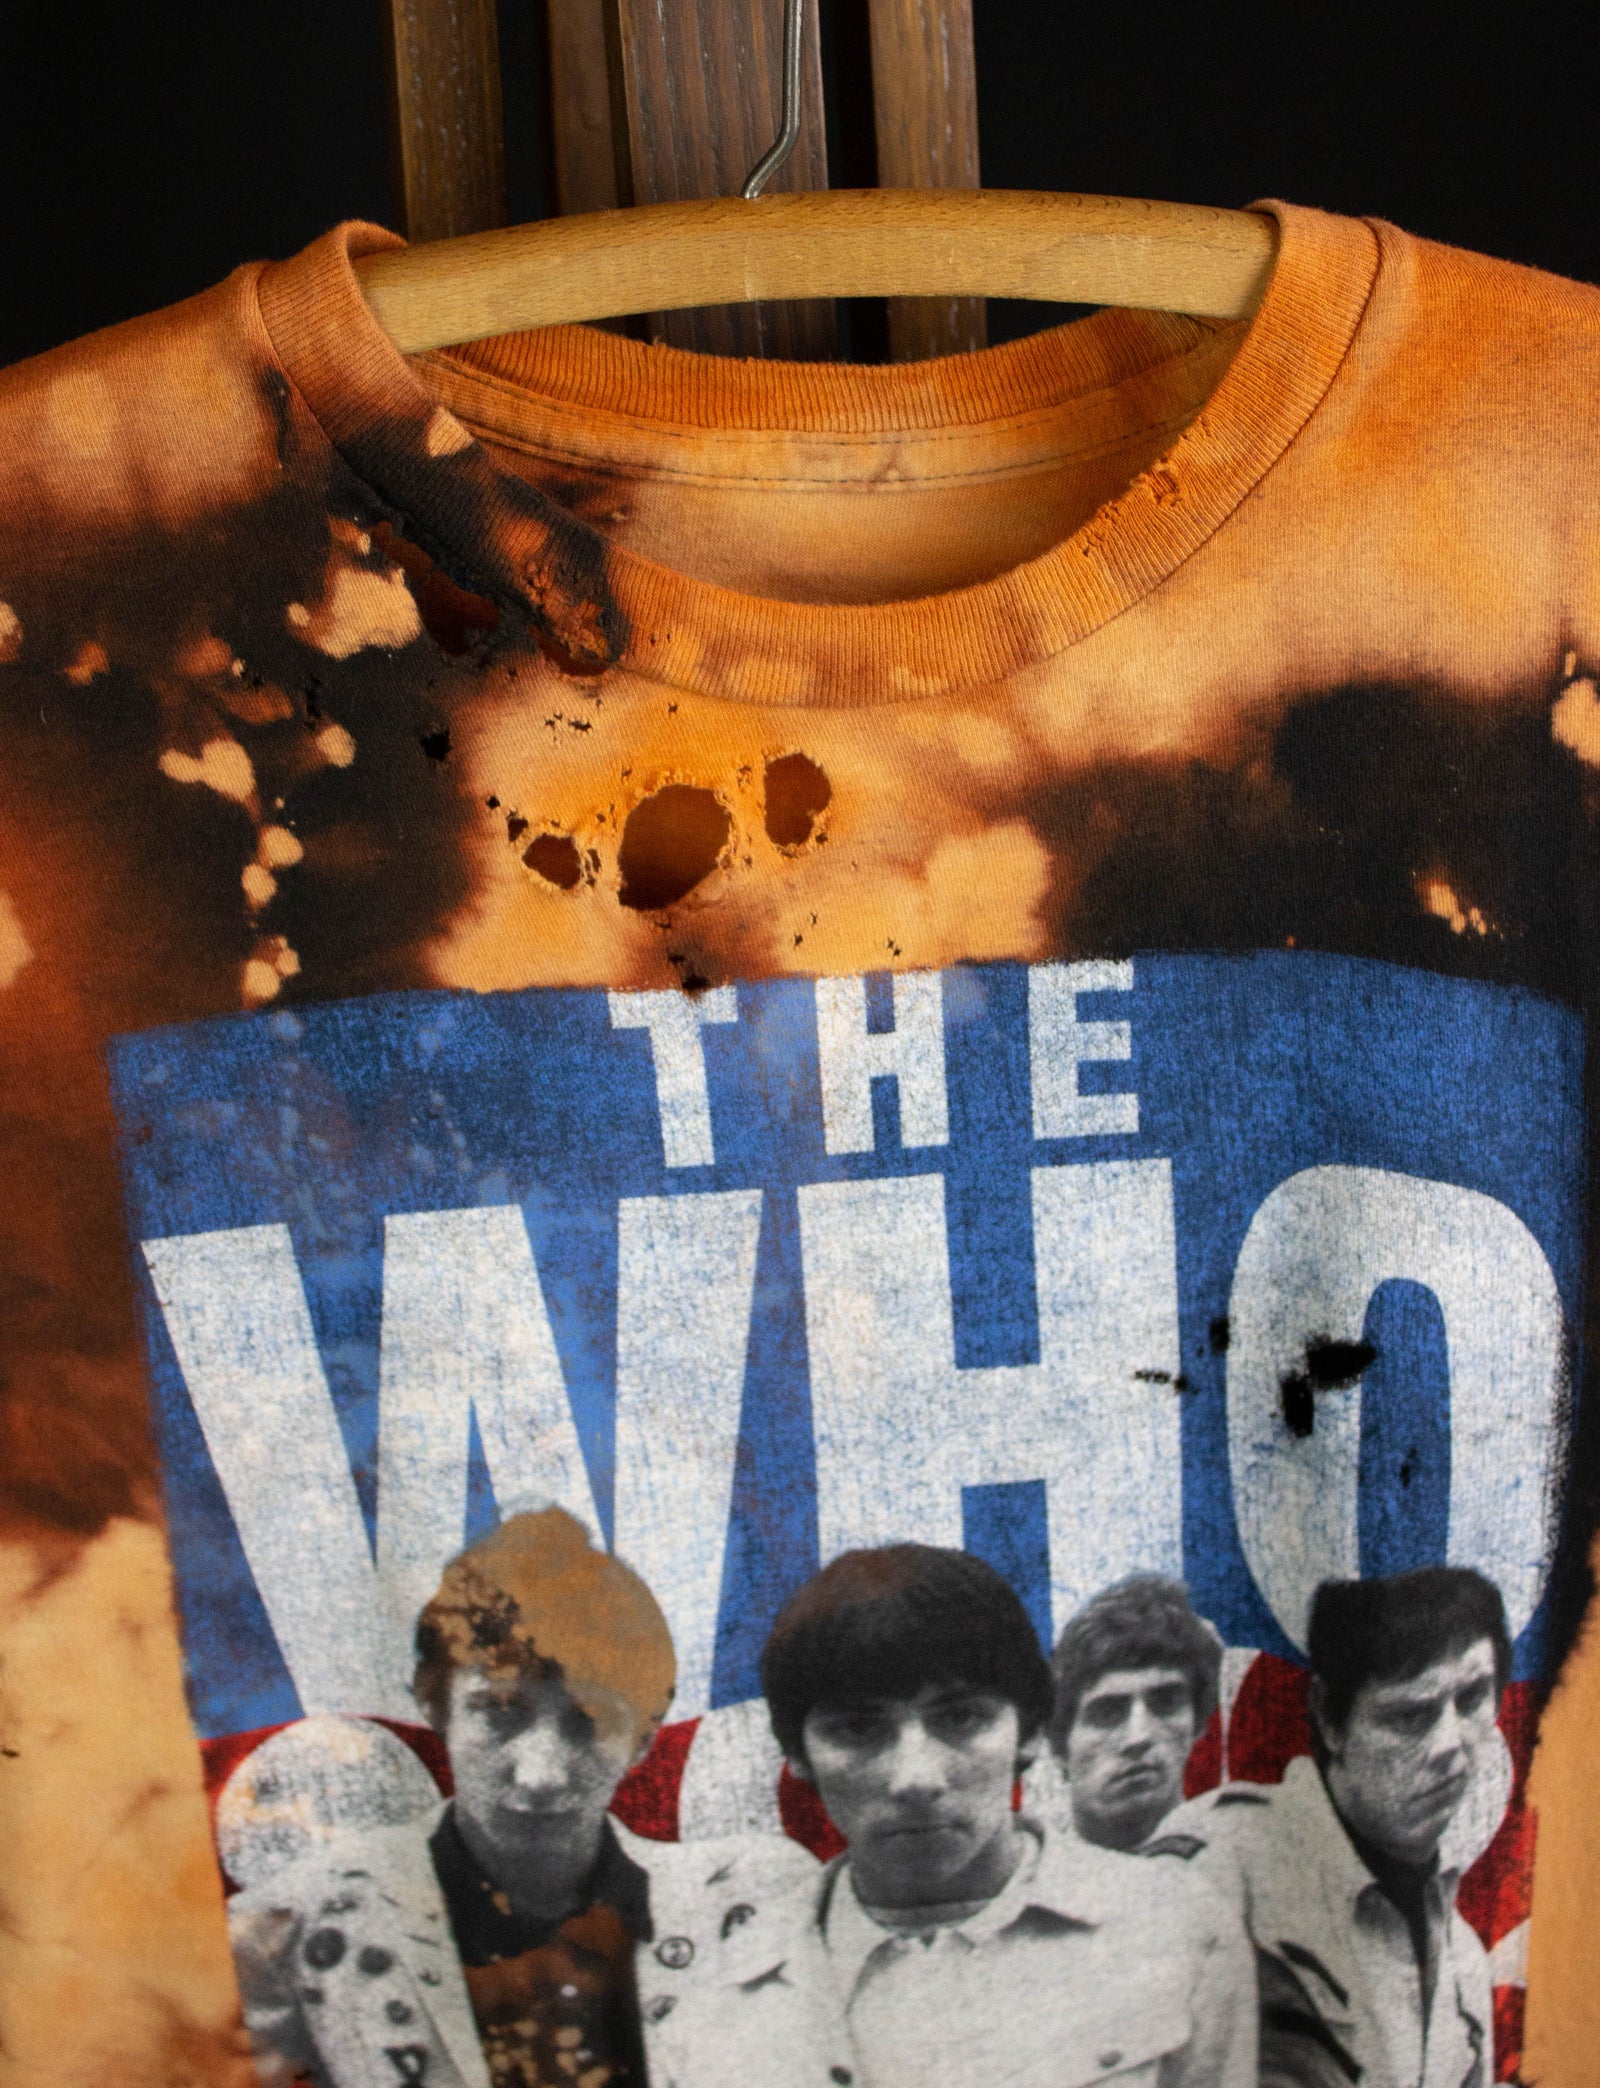 The Who Distressed Concert T Shirt by Christian Benner Medium